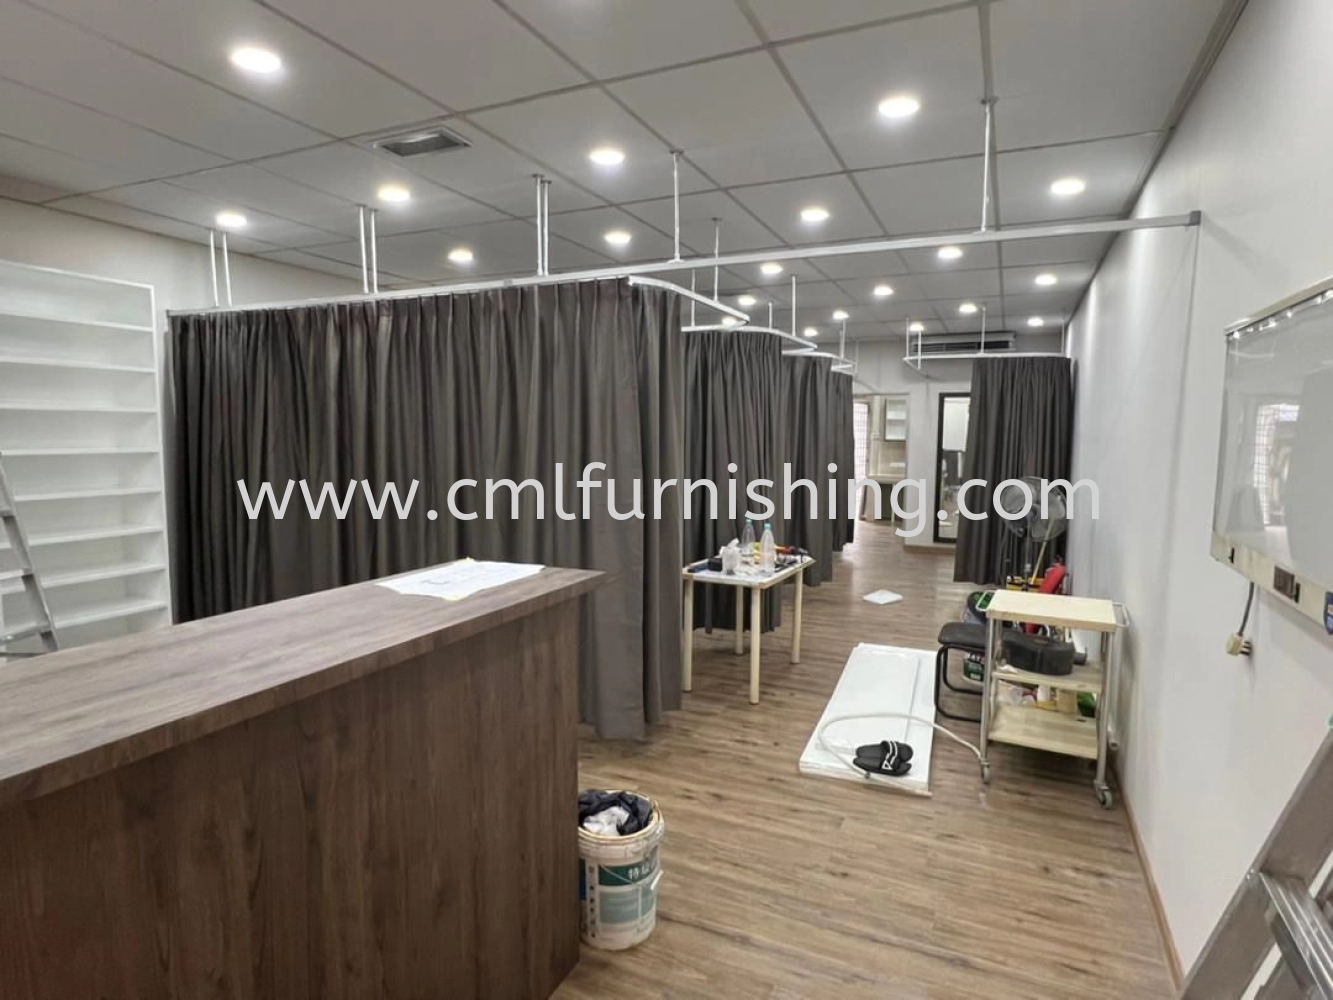 Cubicle Track & Cubicle Curtain